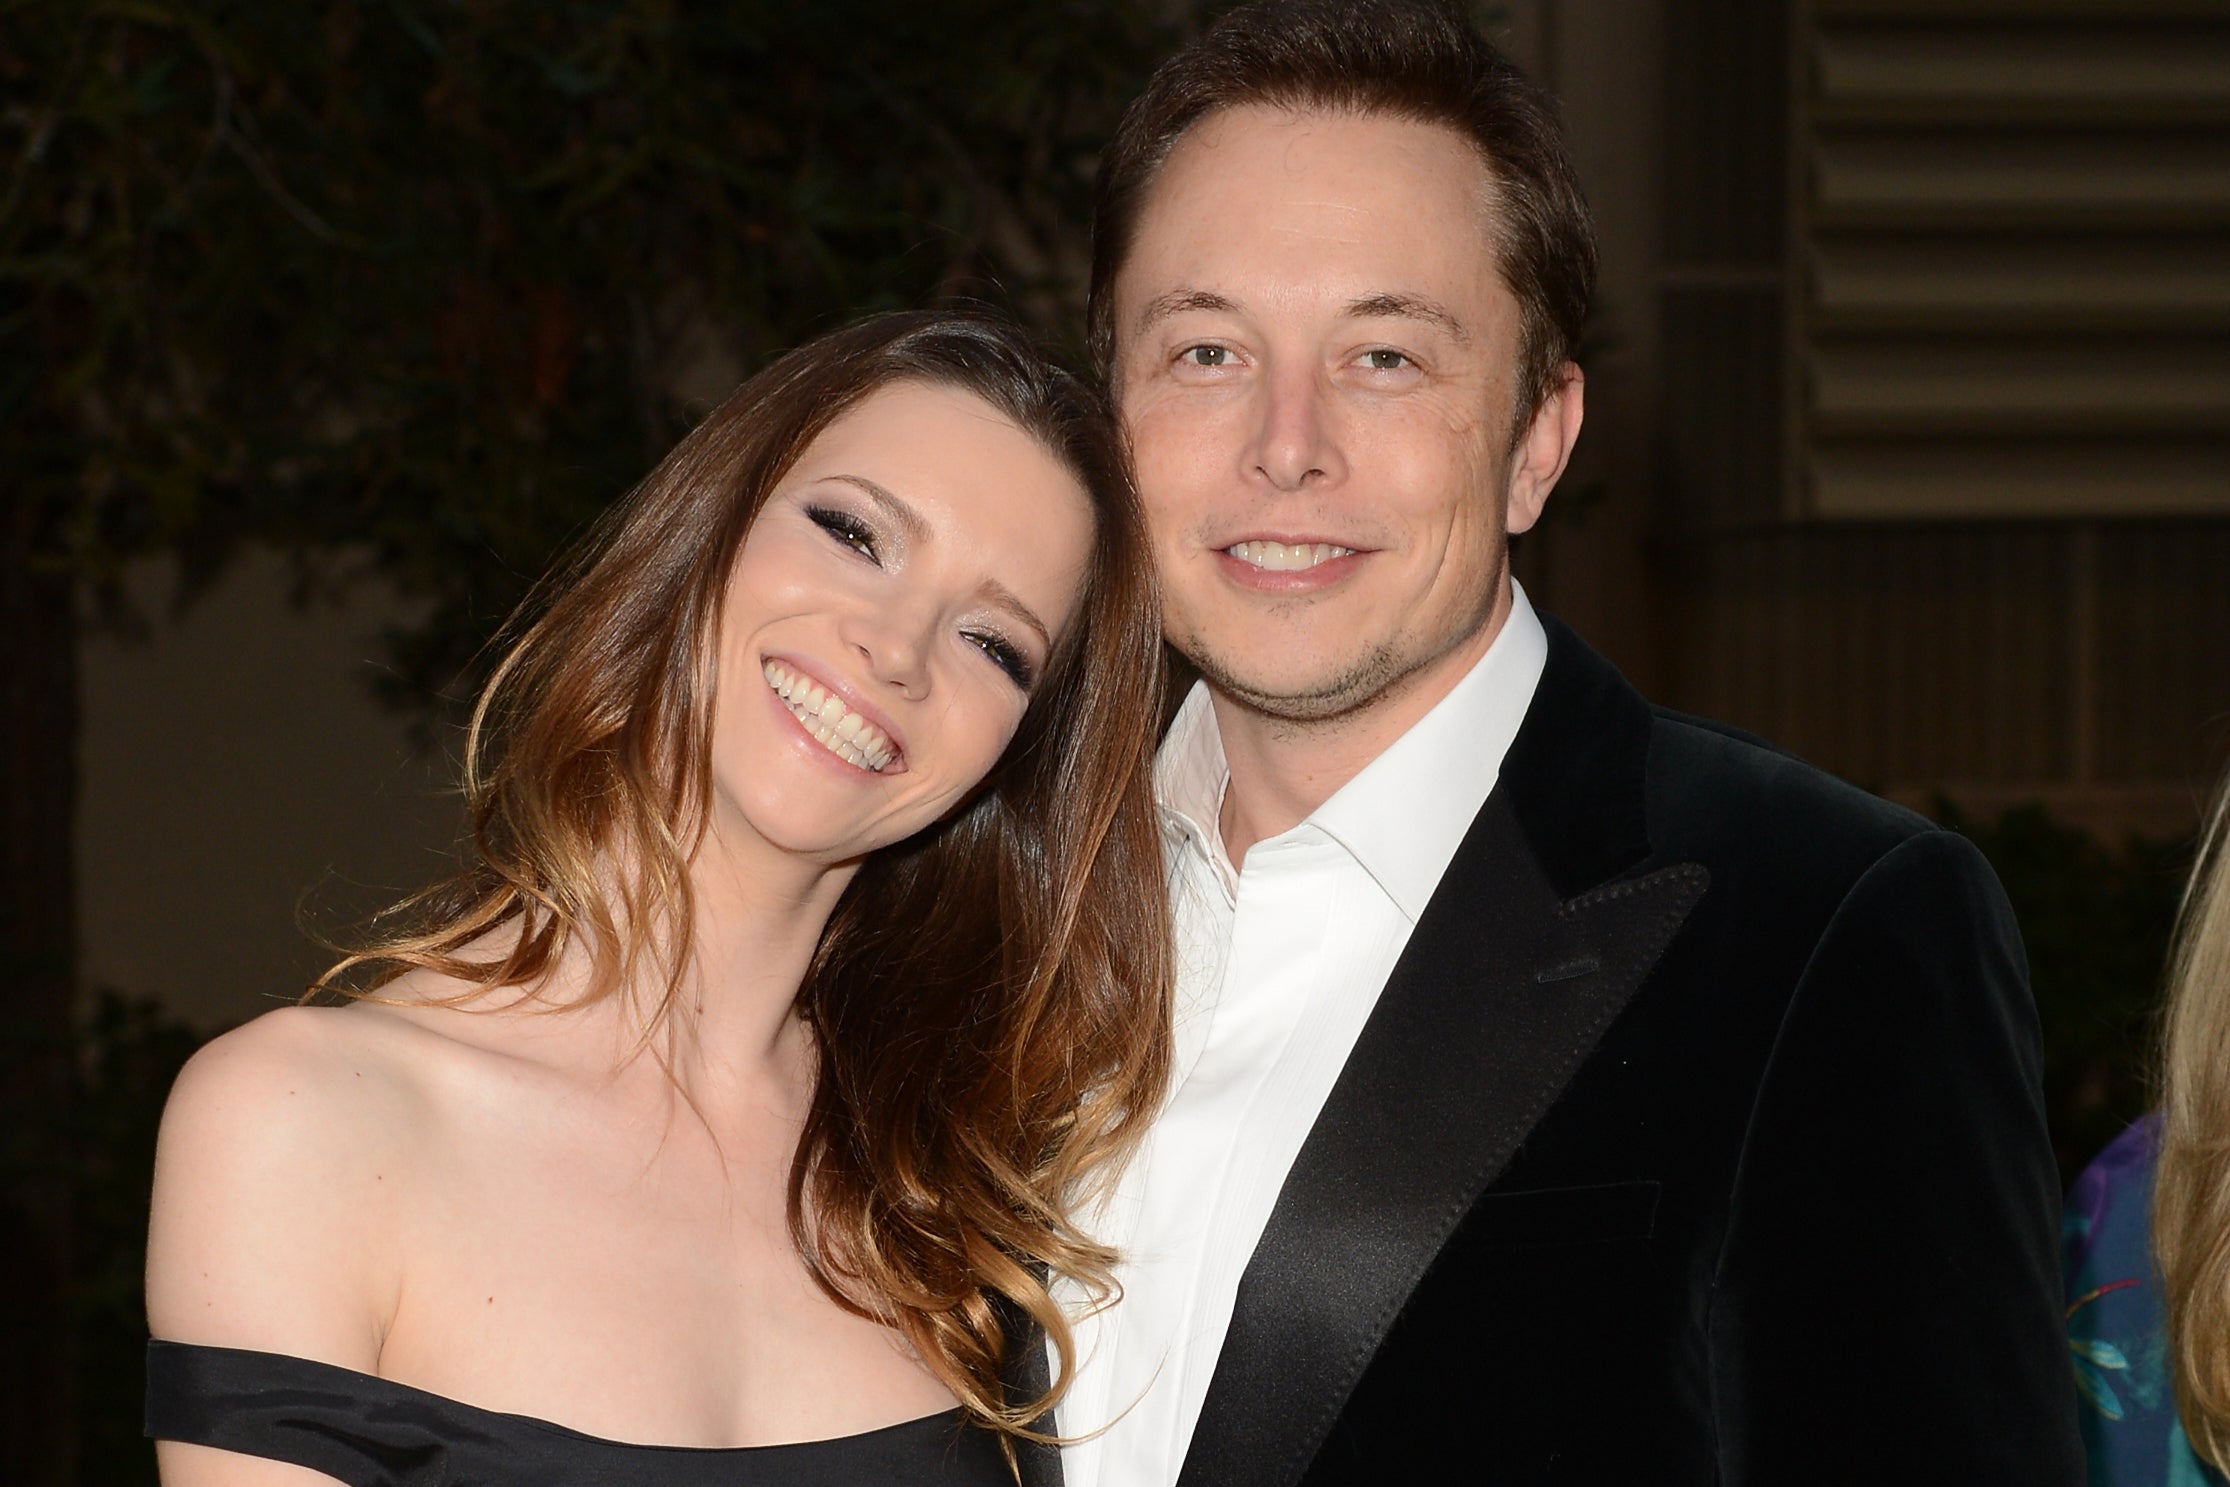 Riley and Musk pictured in 2012, the year of their first marriage